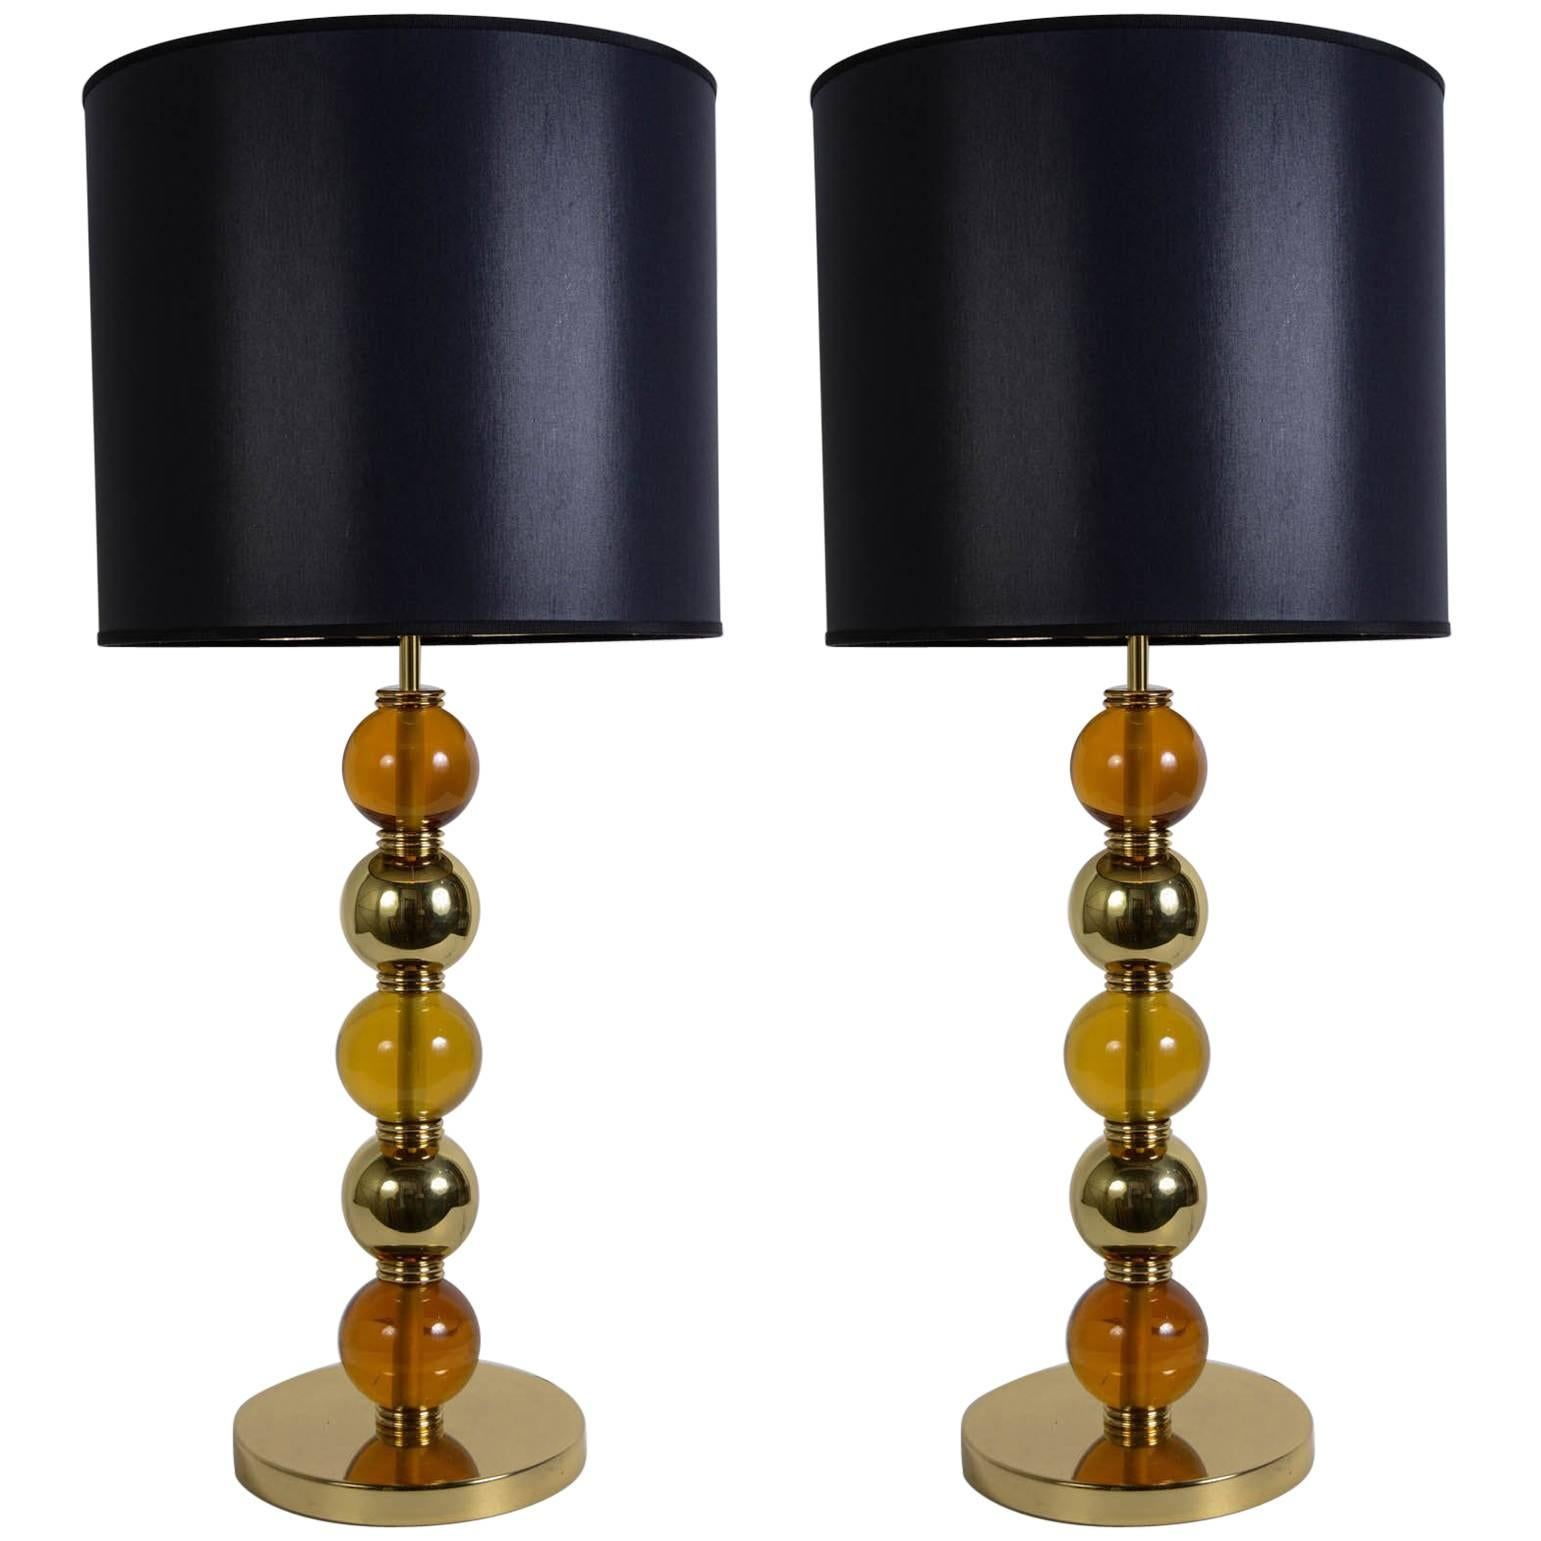 Pair of Murano Glass Lamps in the Style of Seguso